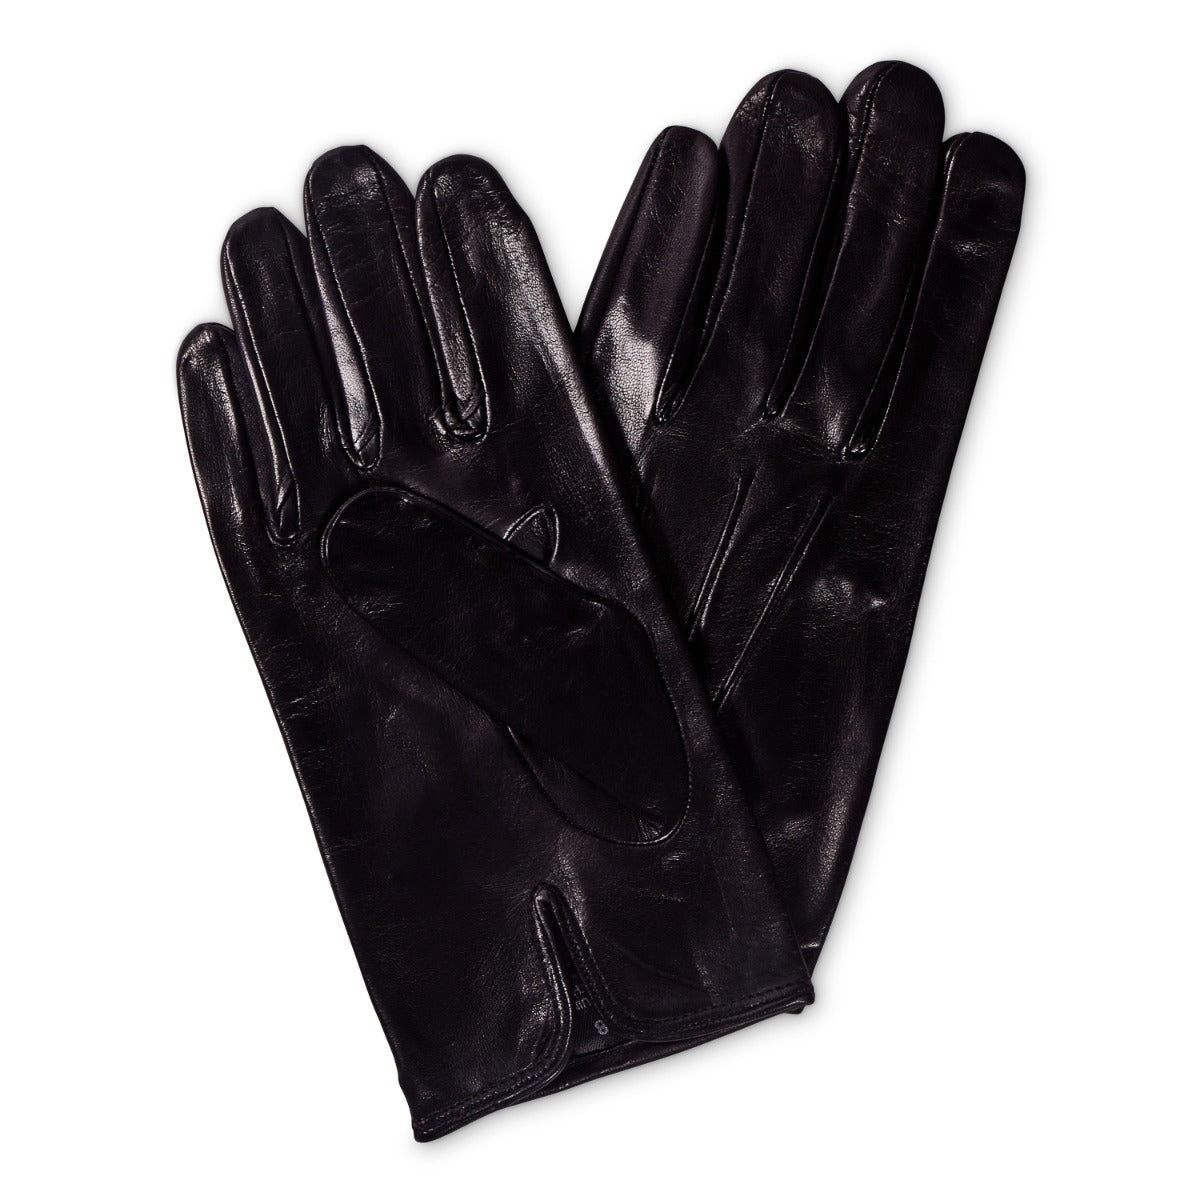 Sovereign Grade Black Nappa Leather Gloves, Silk Lined